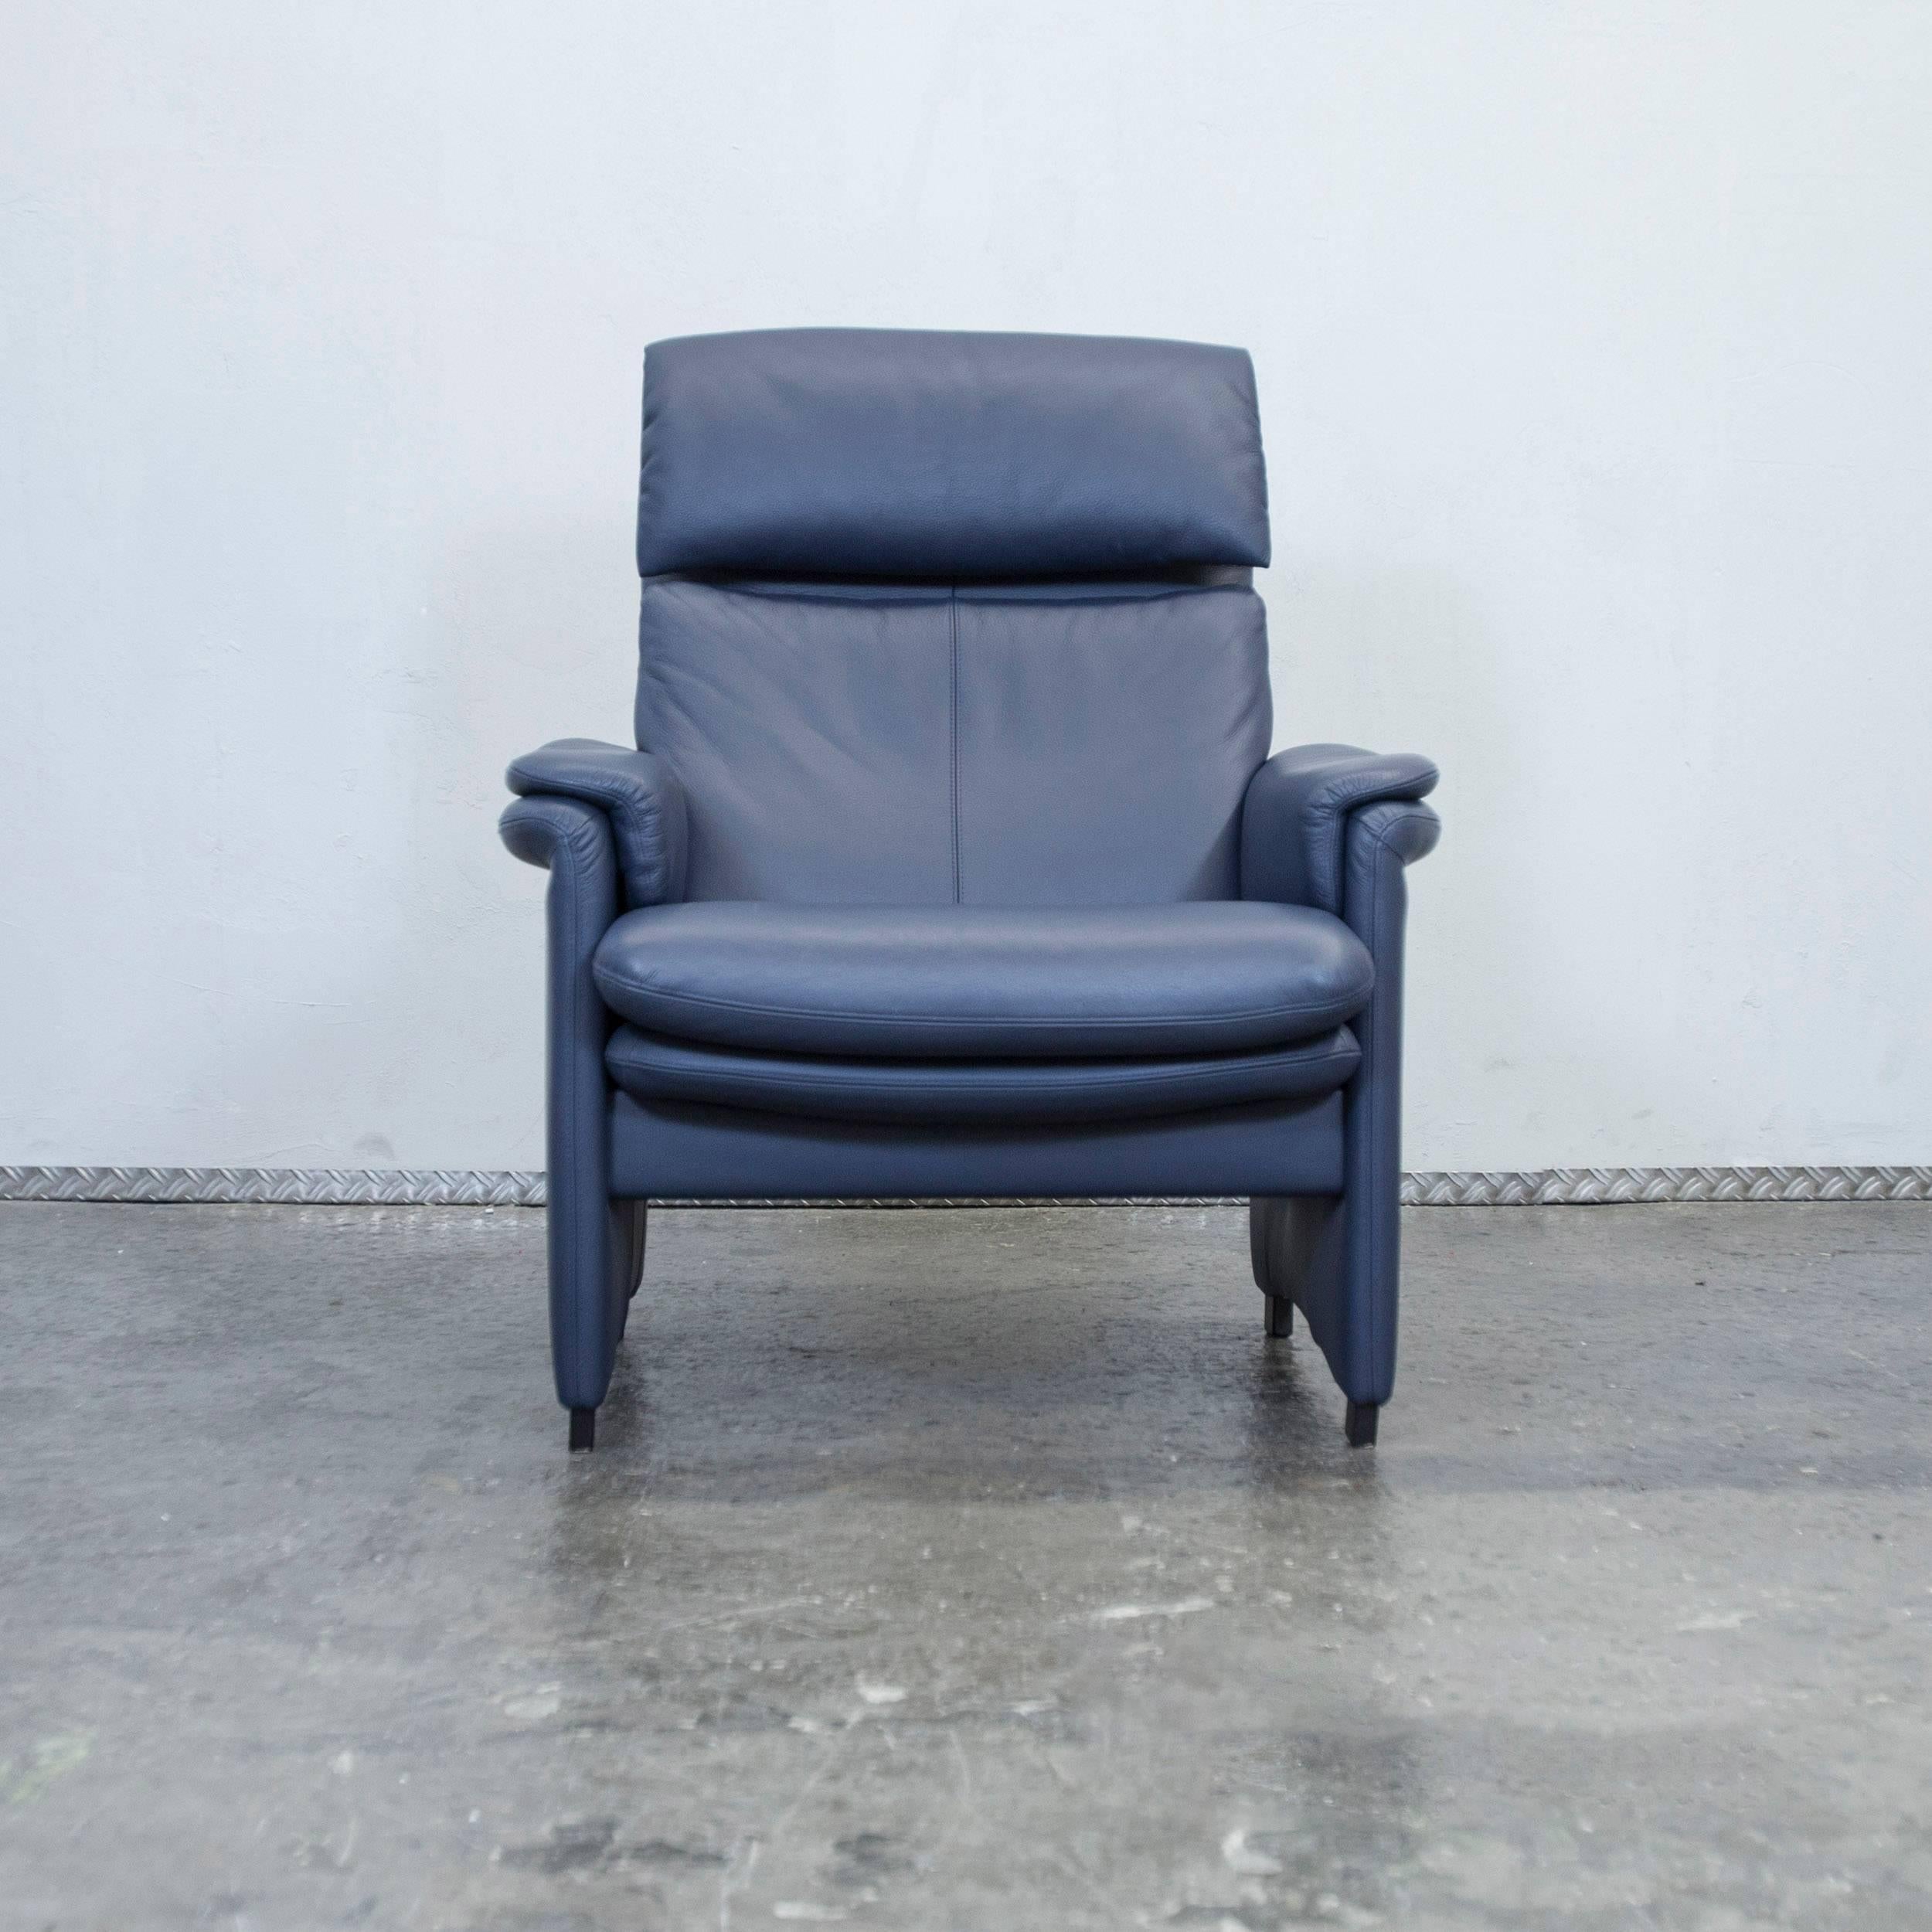 Blue colored original Erpo designer leather relax chair in a modern design, with convenient functions, made for pure comfort.